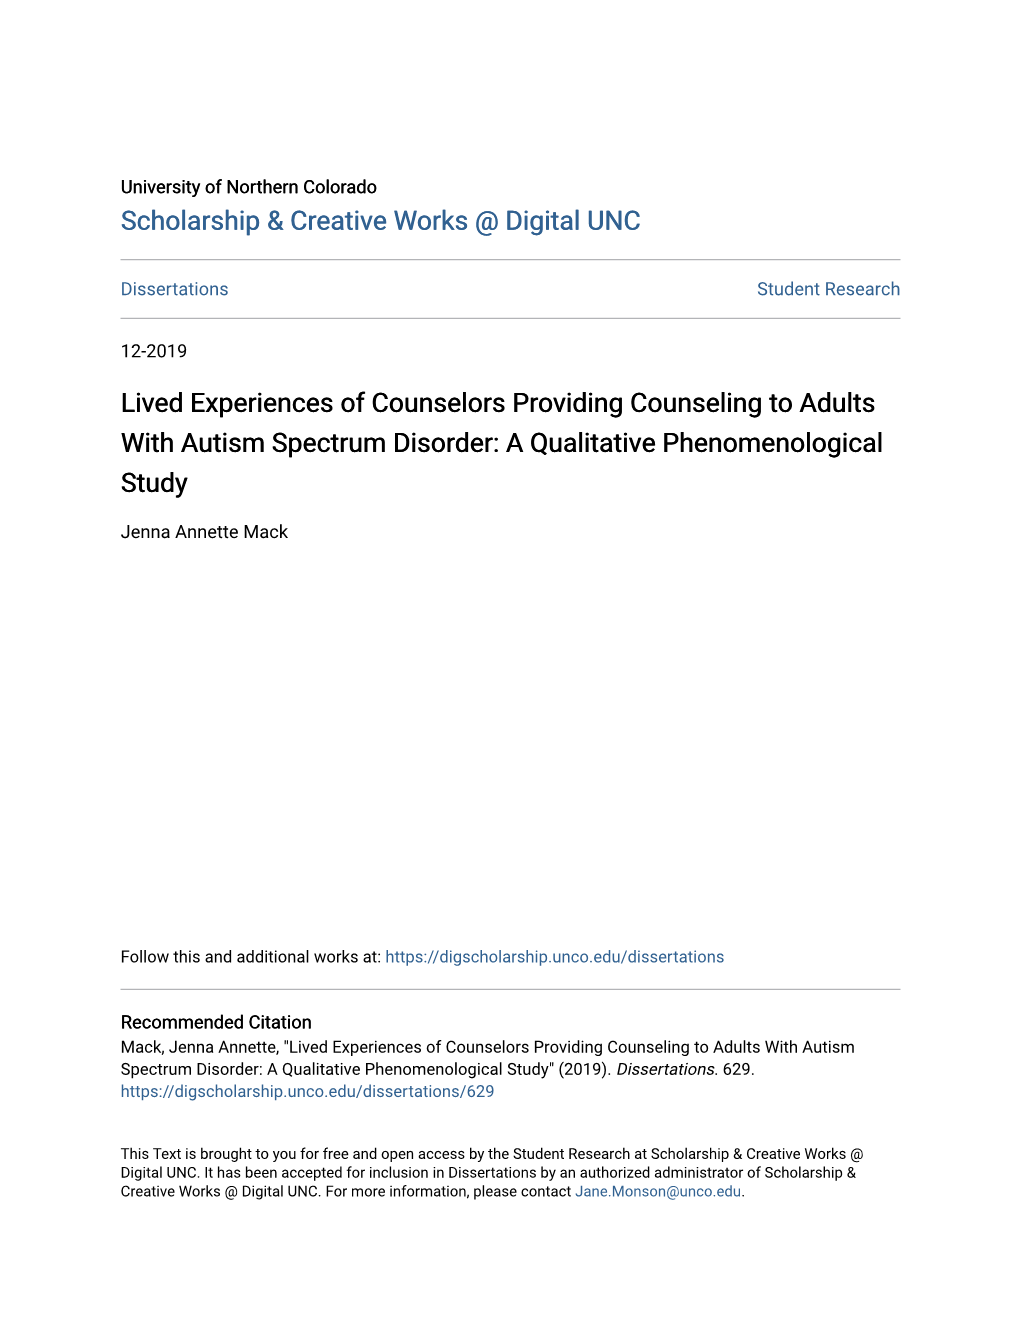 Lived Experiences of Counselors Providing Counseling to Adults with Autism Spectrum Disorder: a Qualitative Phenomenological Study